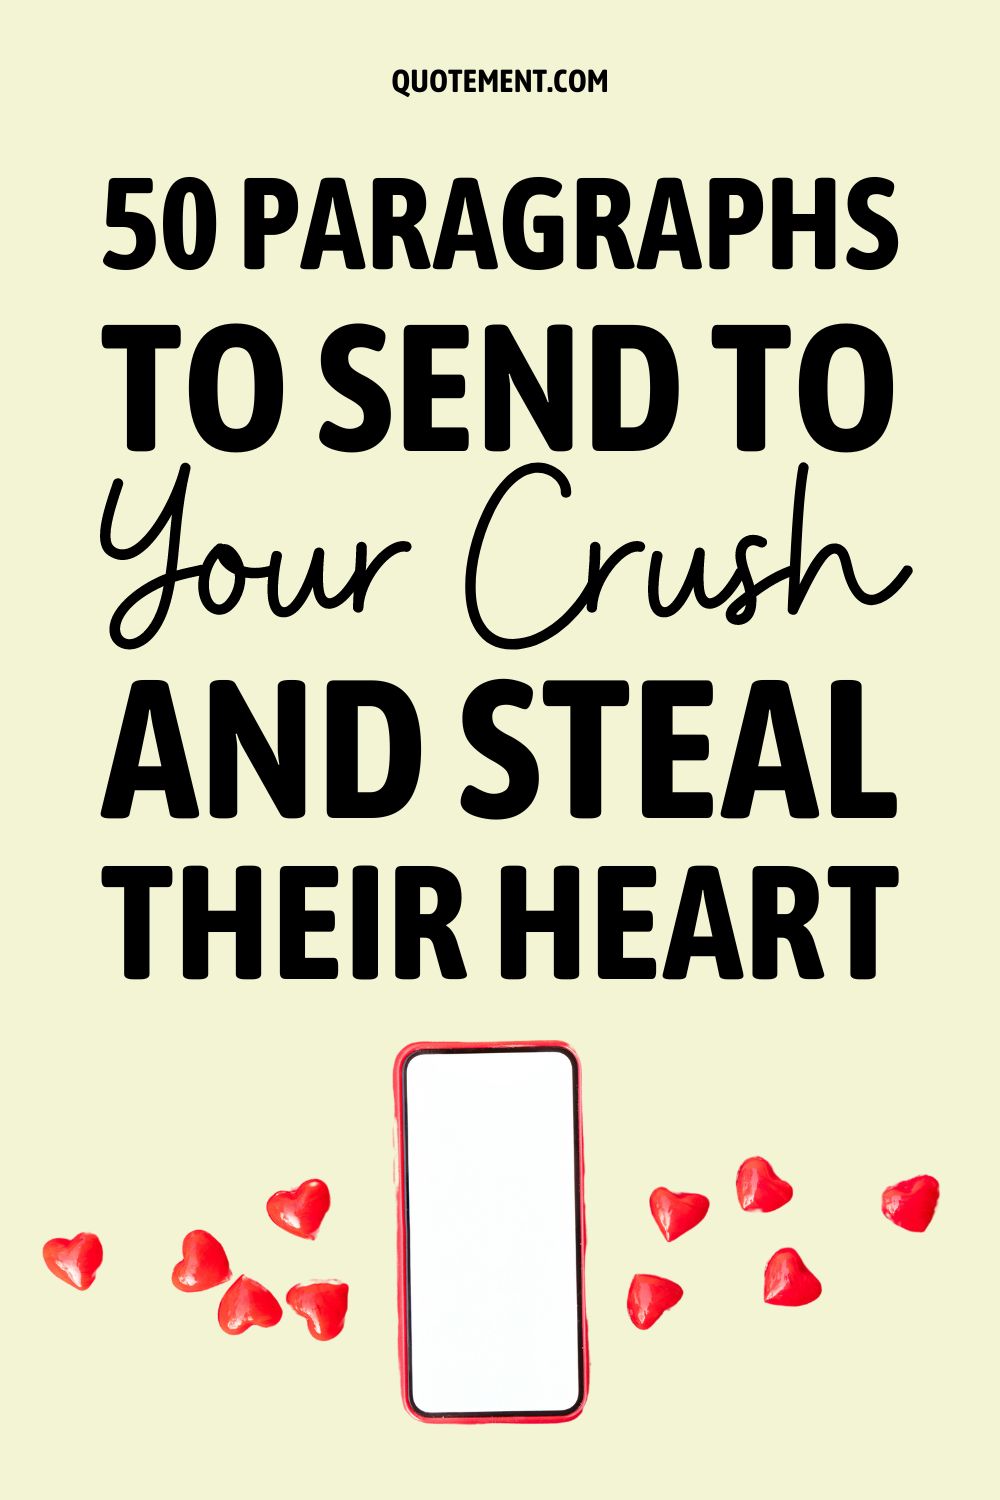 50 Paragraphs To Send To Your Crush And Steal Their Heart
